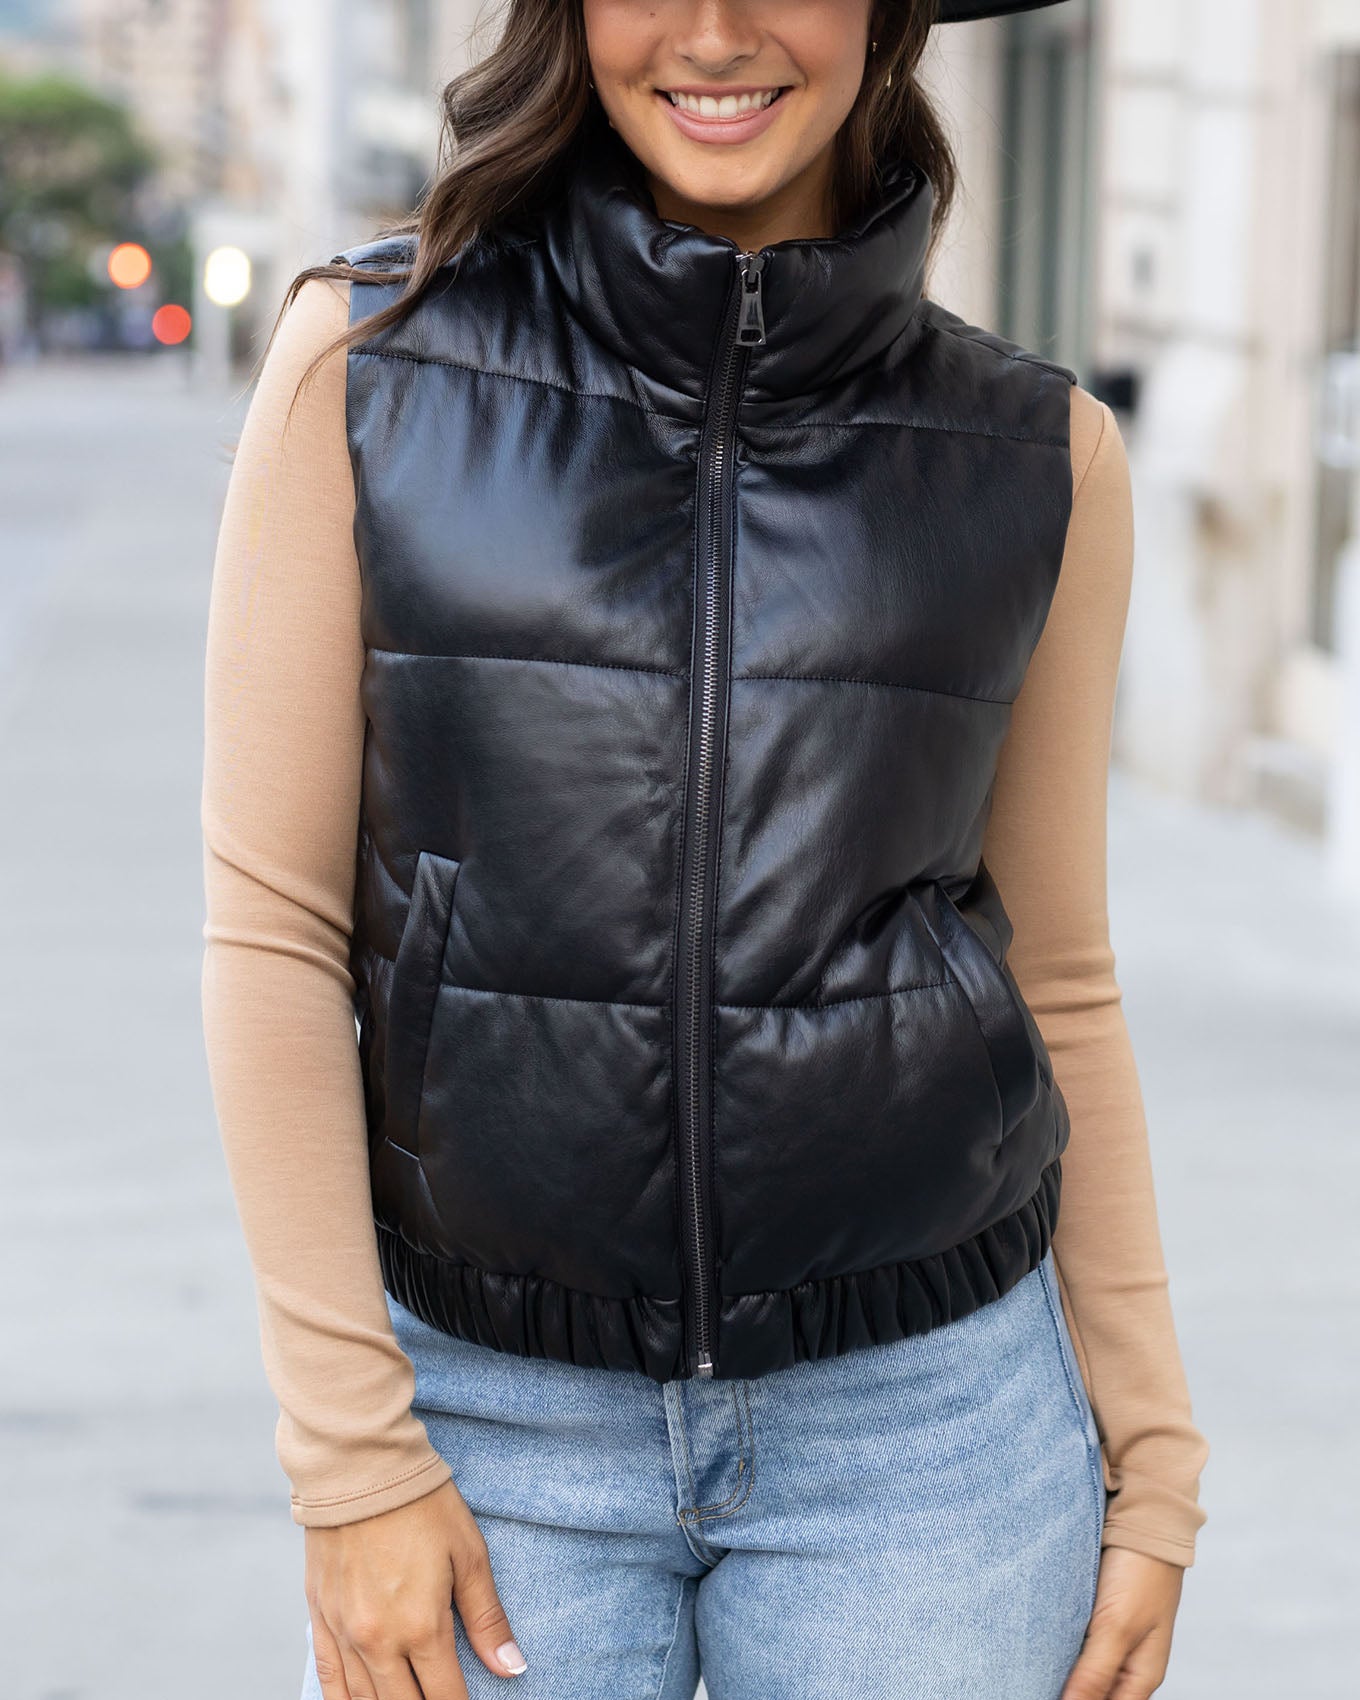 The Best Faux Leather Pieces In My Wardrobe - Under $150